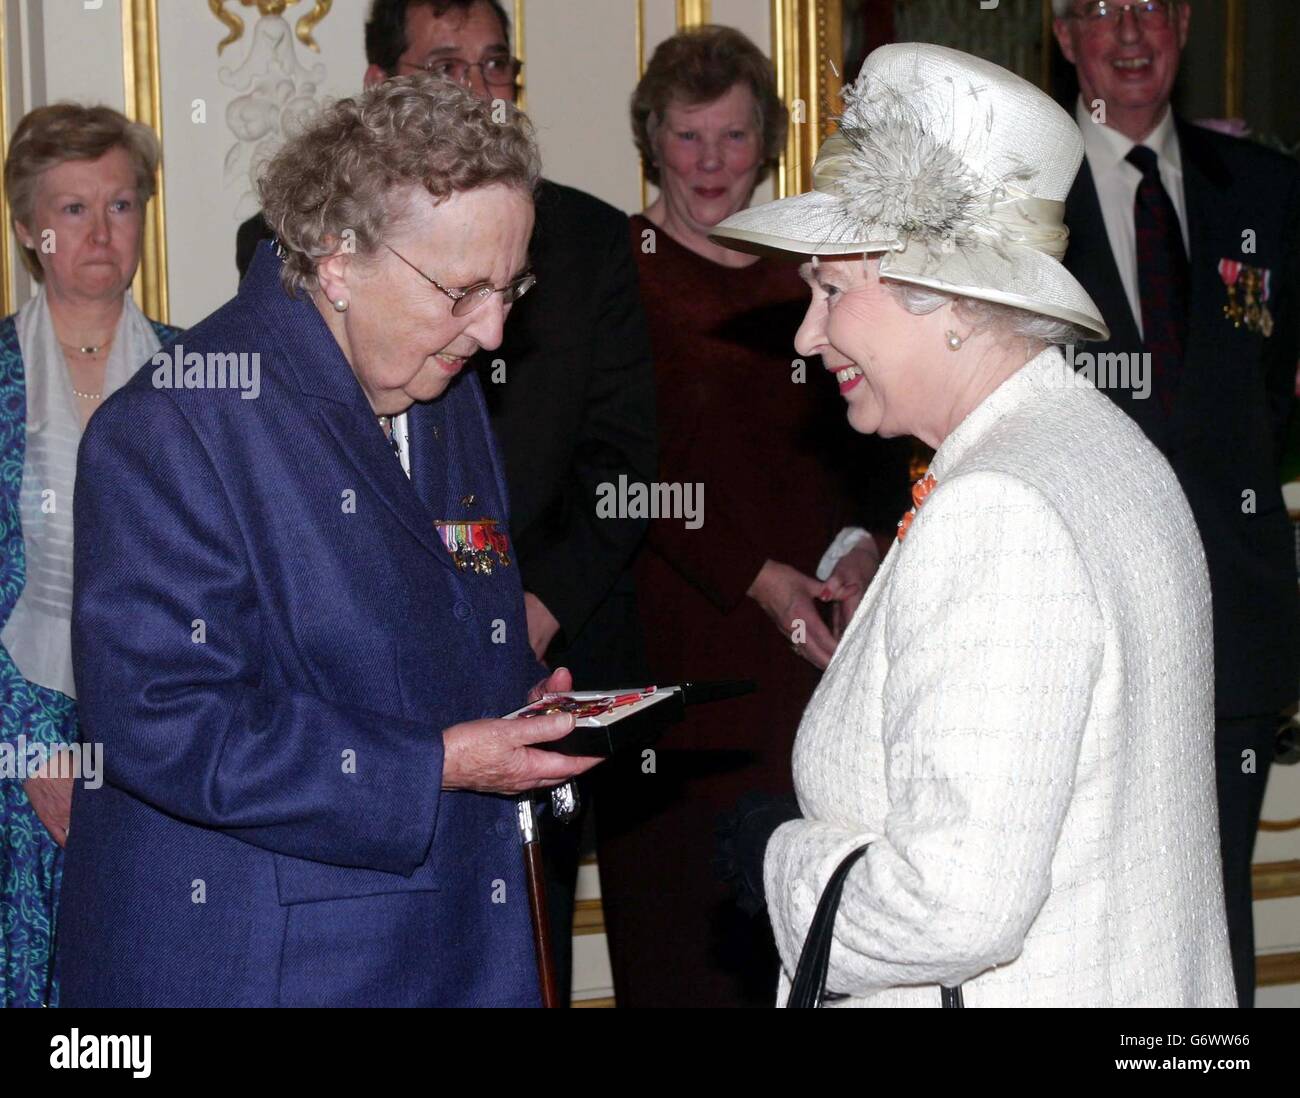 Britain's Queen Elizabeth II presents an award to resistance leader Pearl Cornioley at the Elysee Palace, in Paris, during an official state visit to France. The Queen made her first state visit by train today as she took the Eurostar to Paris for a three-day tour to mark the 100th anniversary of Entente Cordiale. Stock Photo